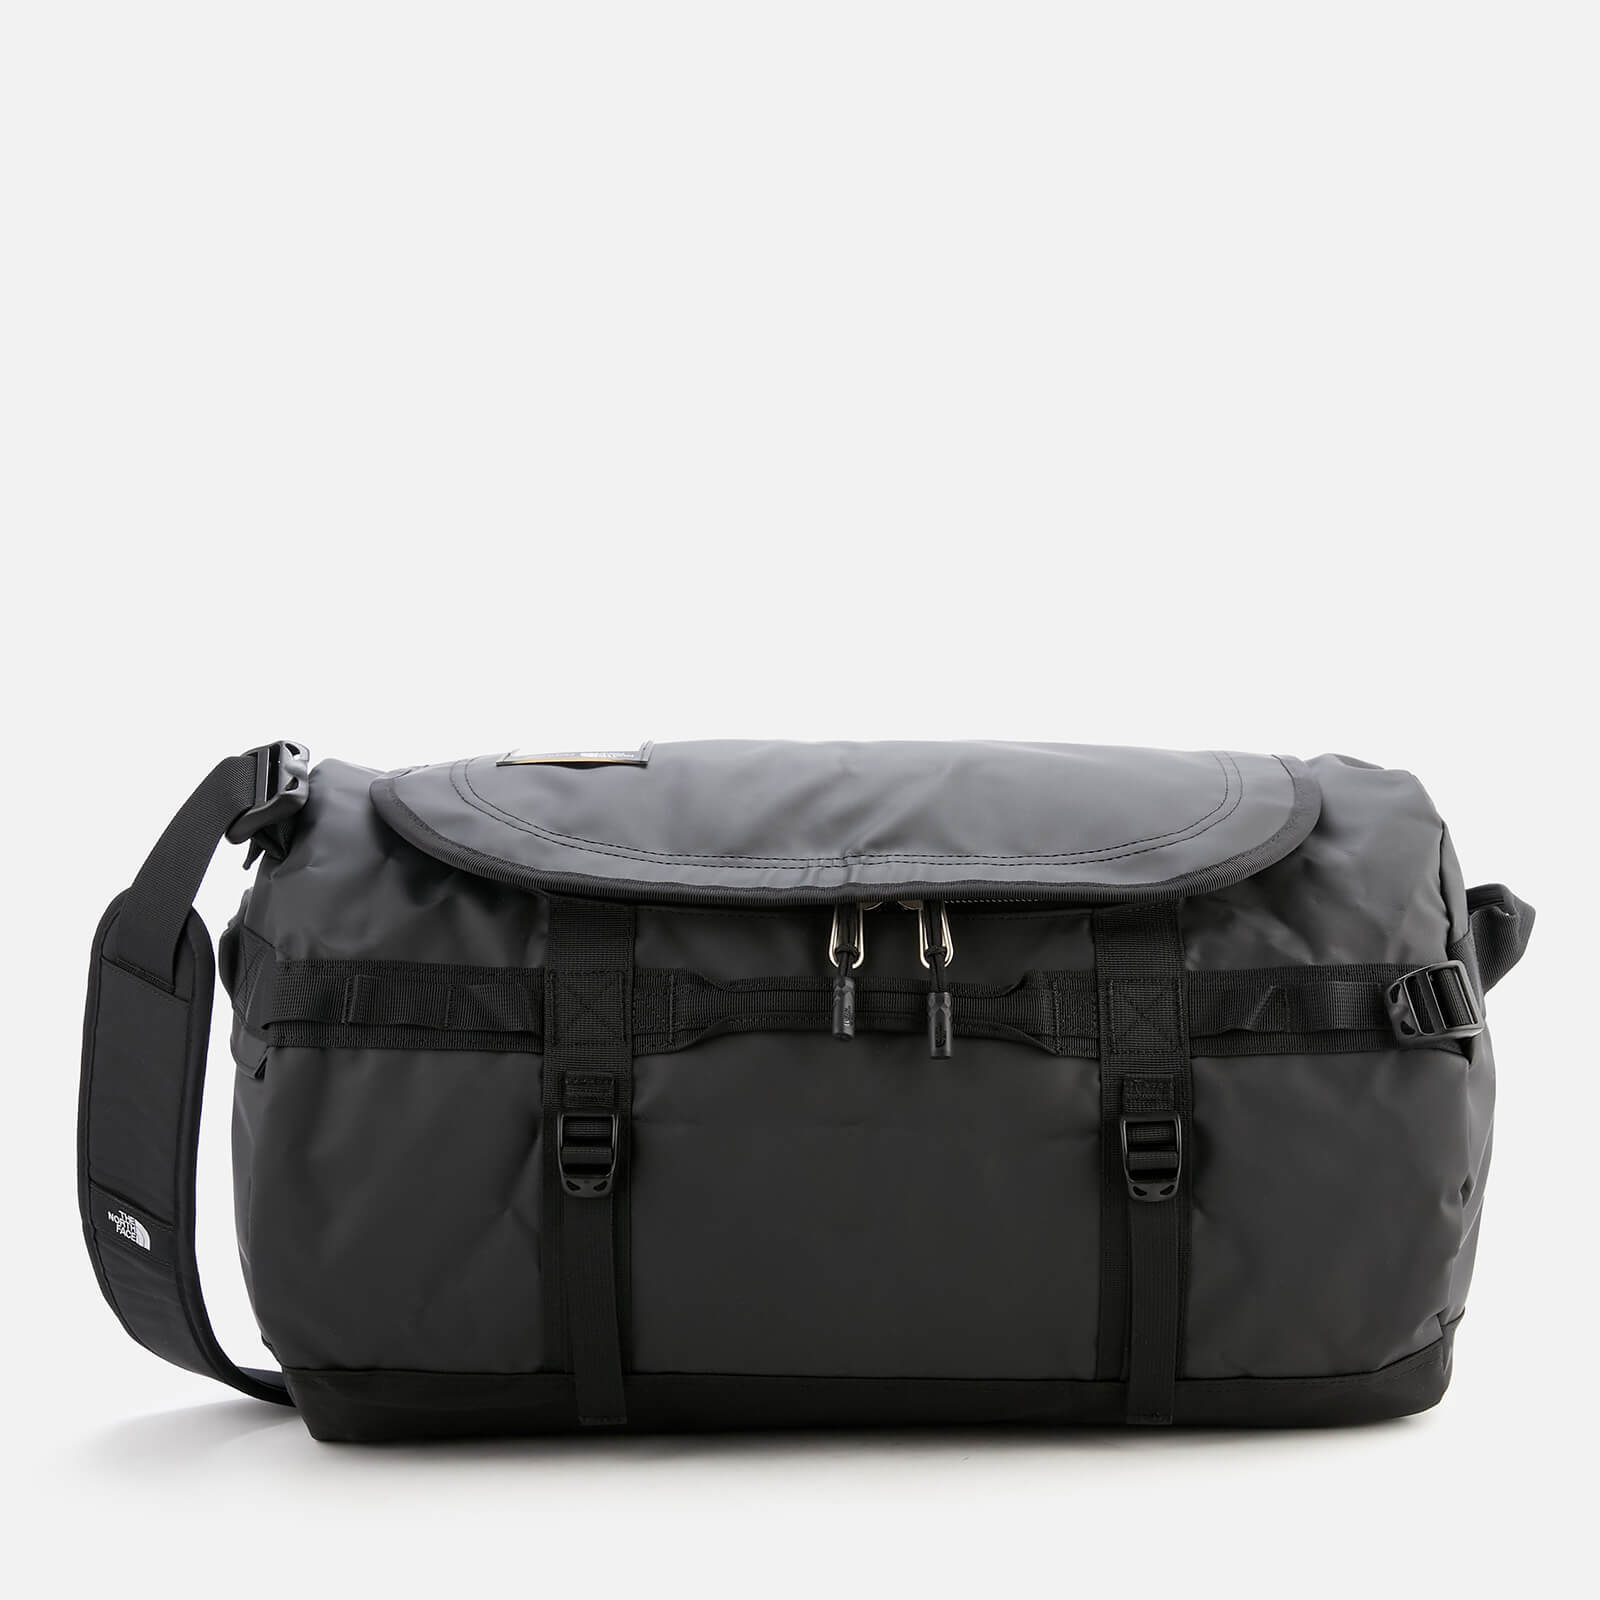 The North Face Base Camp Duffel Bag Small 50 Litres in Black Black